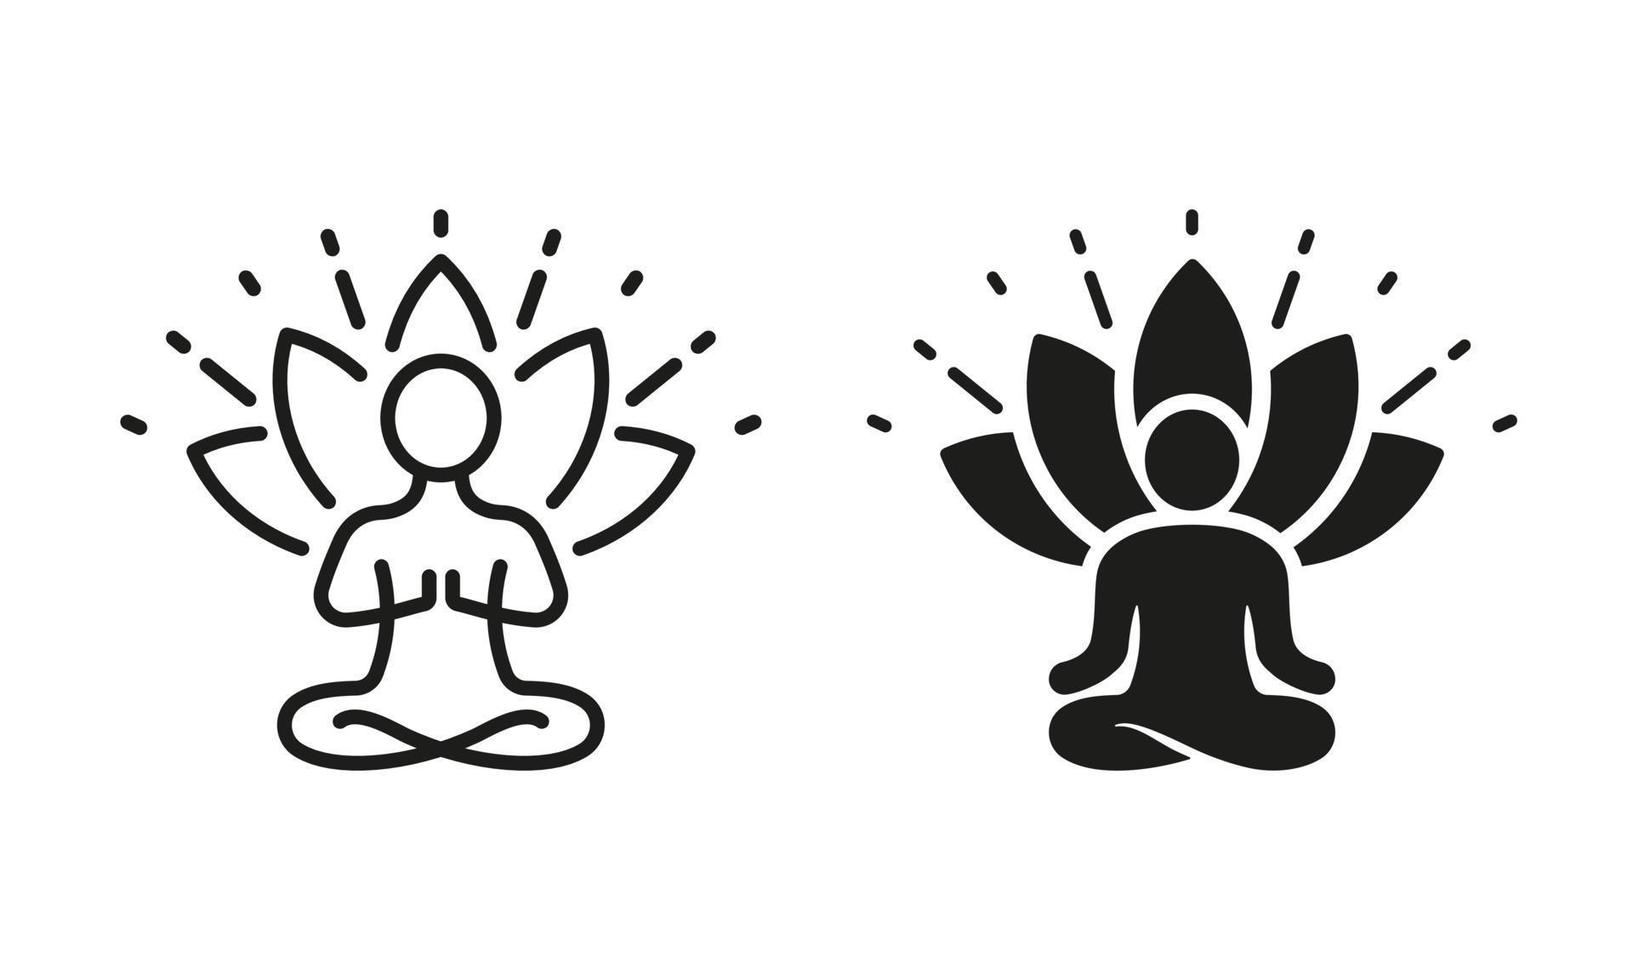 Person in Pose Lotus, Yoga Silhouette and Line Icon Set. Spiritual Energy Meditation Relax Pictogram. Meditate Relaxation Asana Exercise. Zen Wellness. Editable Stroke. Isolated Vector Illustration.